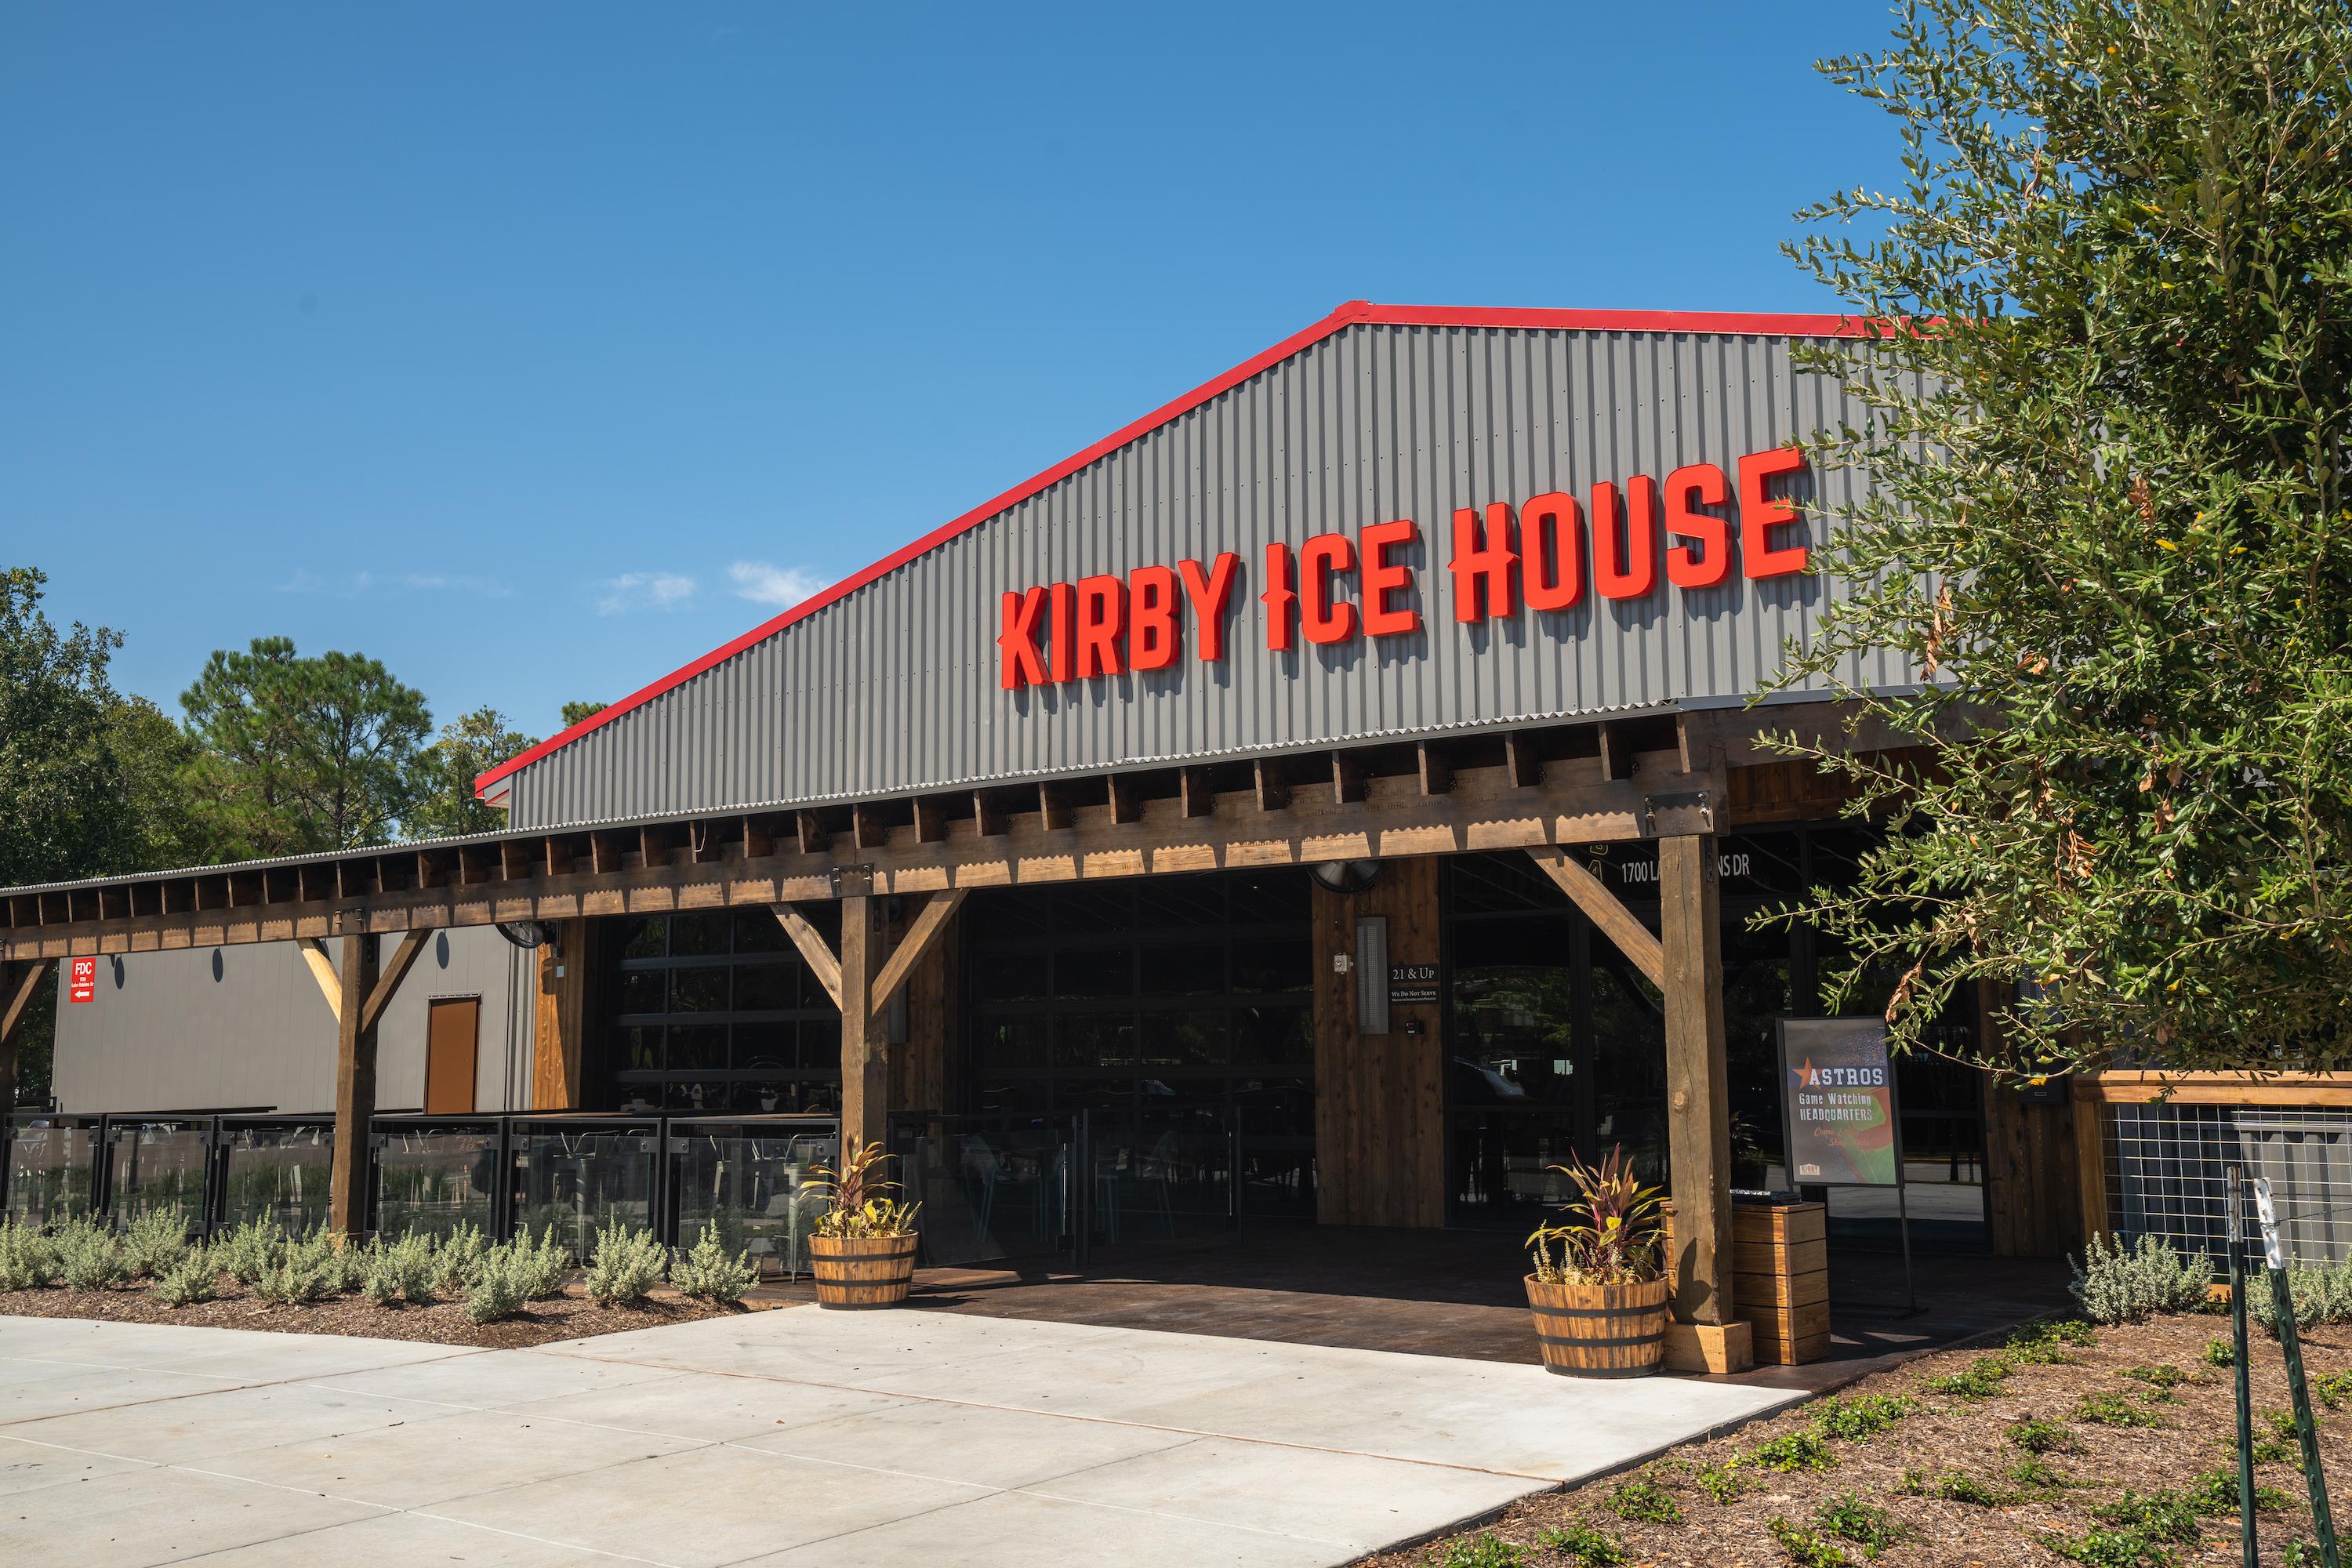 Kirby Ice House is coming to The Woodlands Town Center!